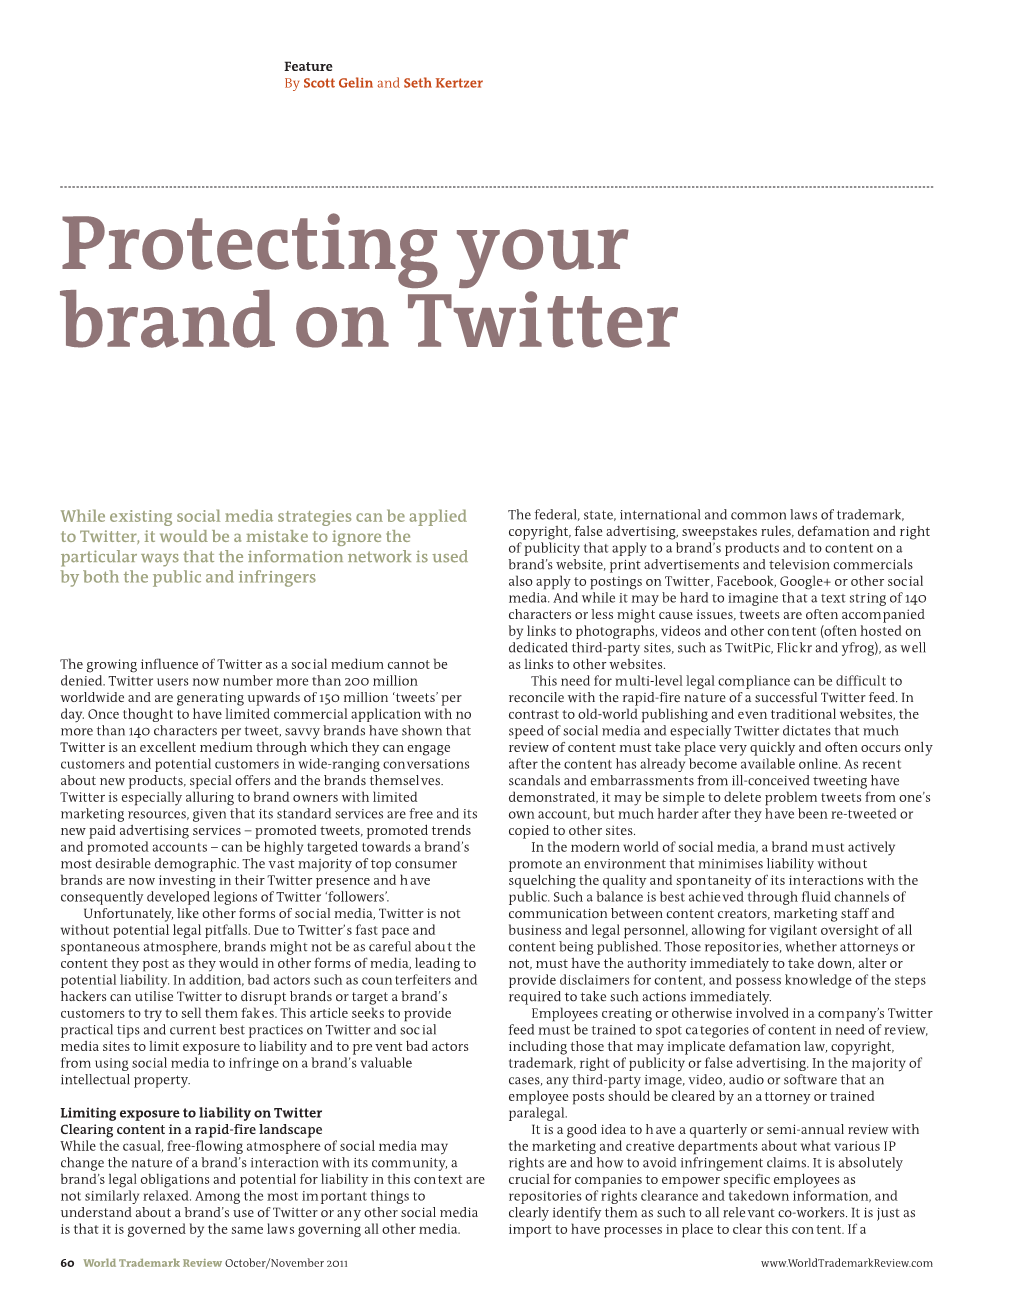 Protecting Your Brand on Twitter